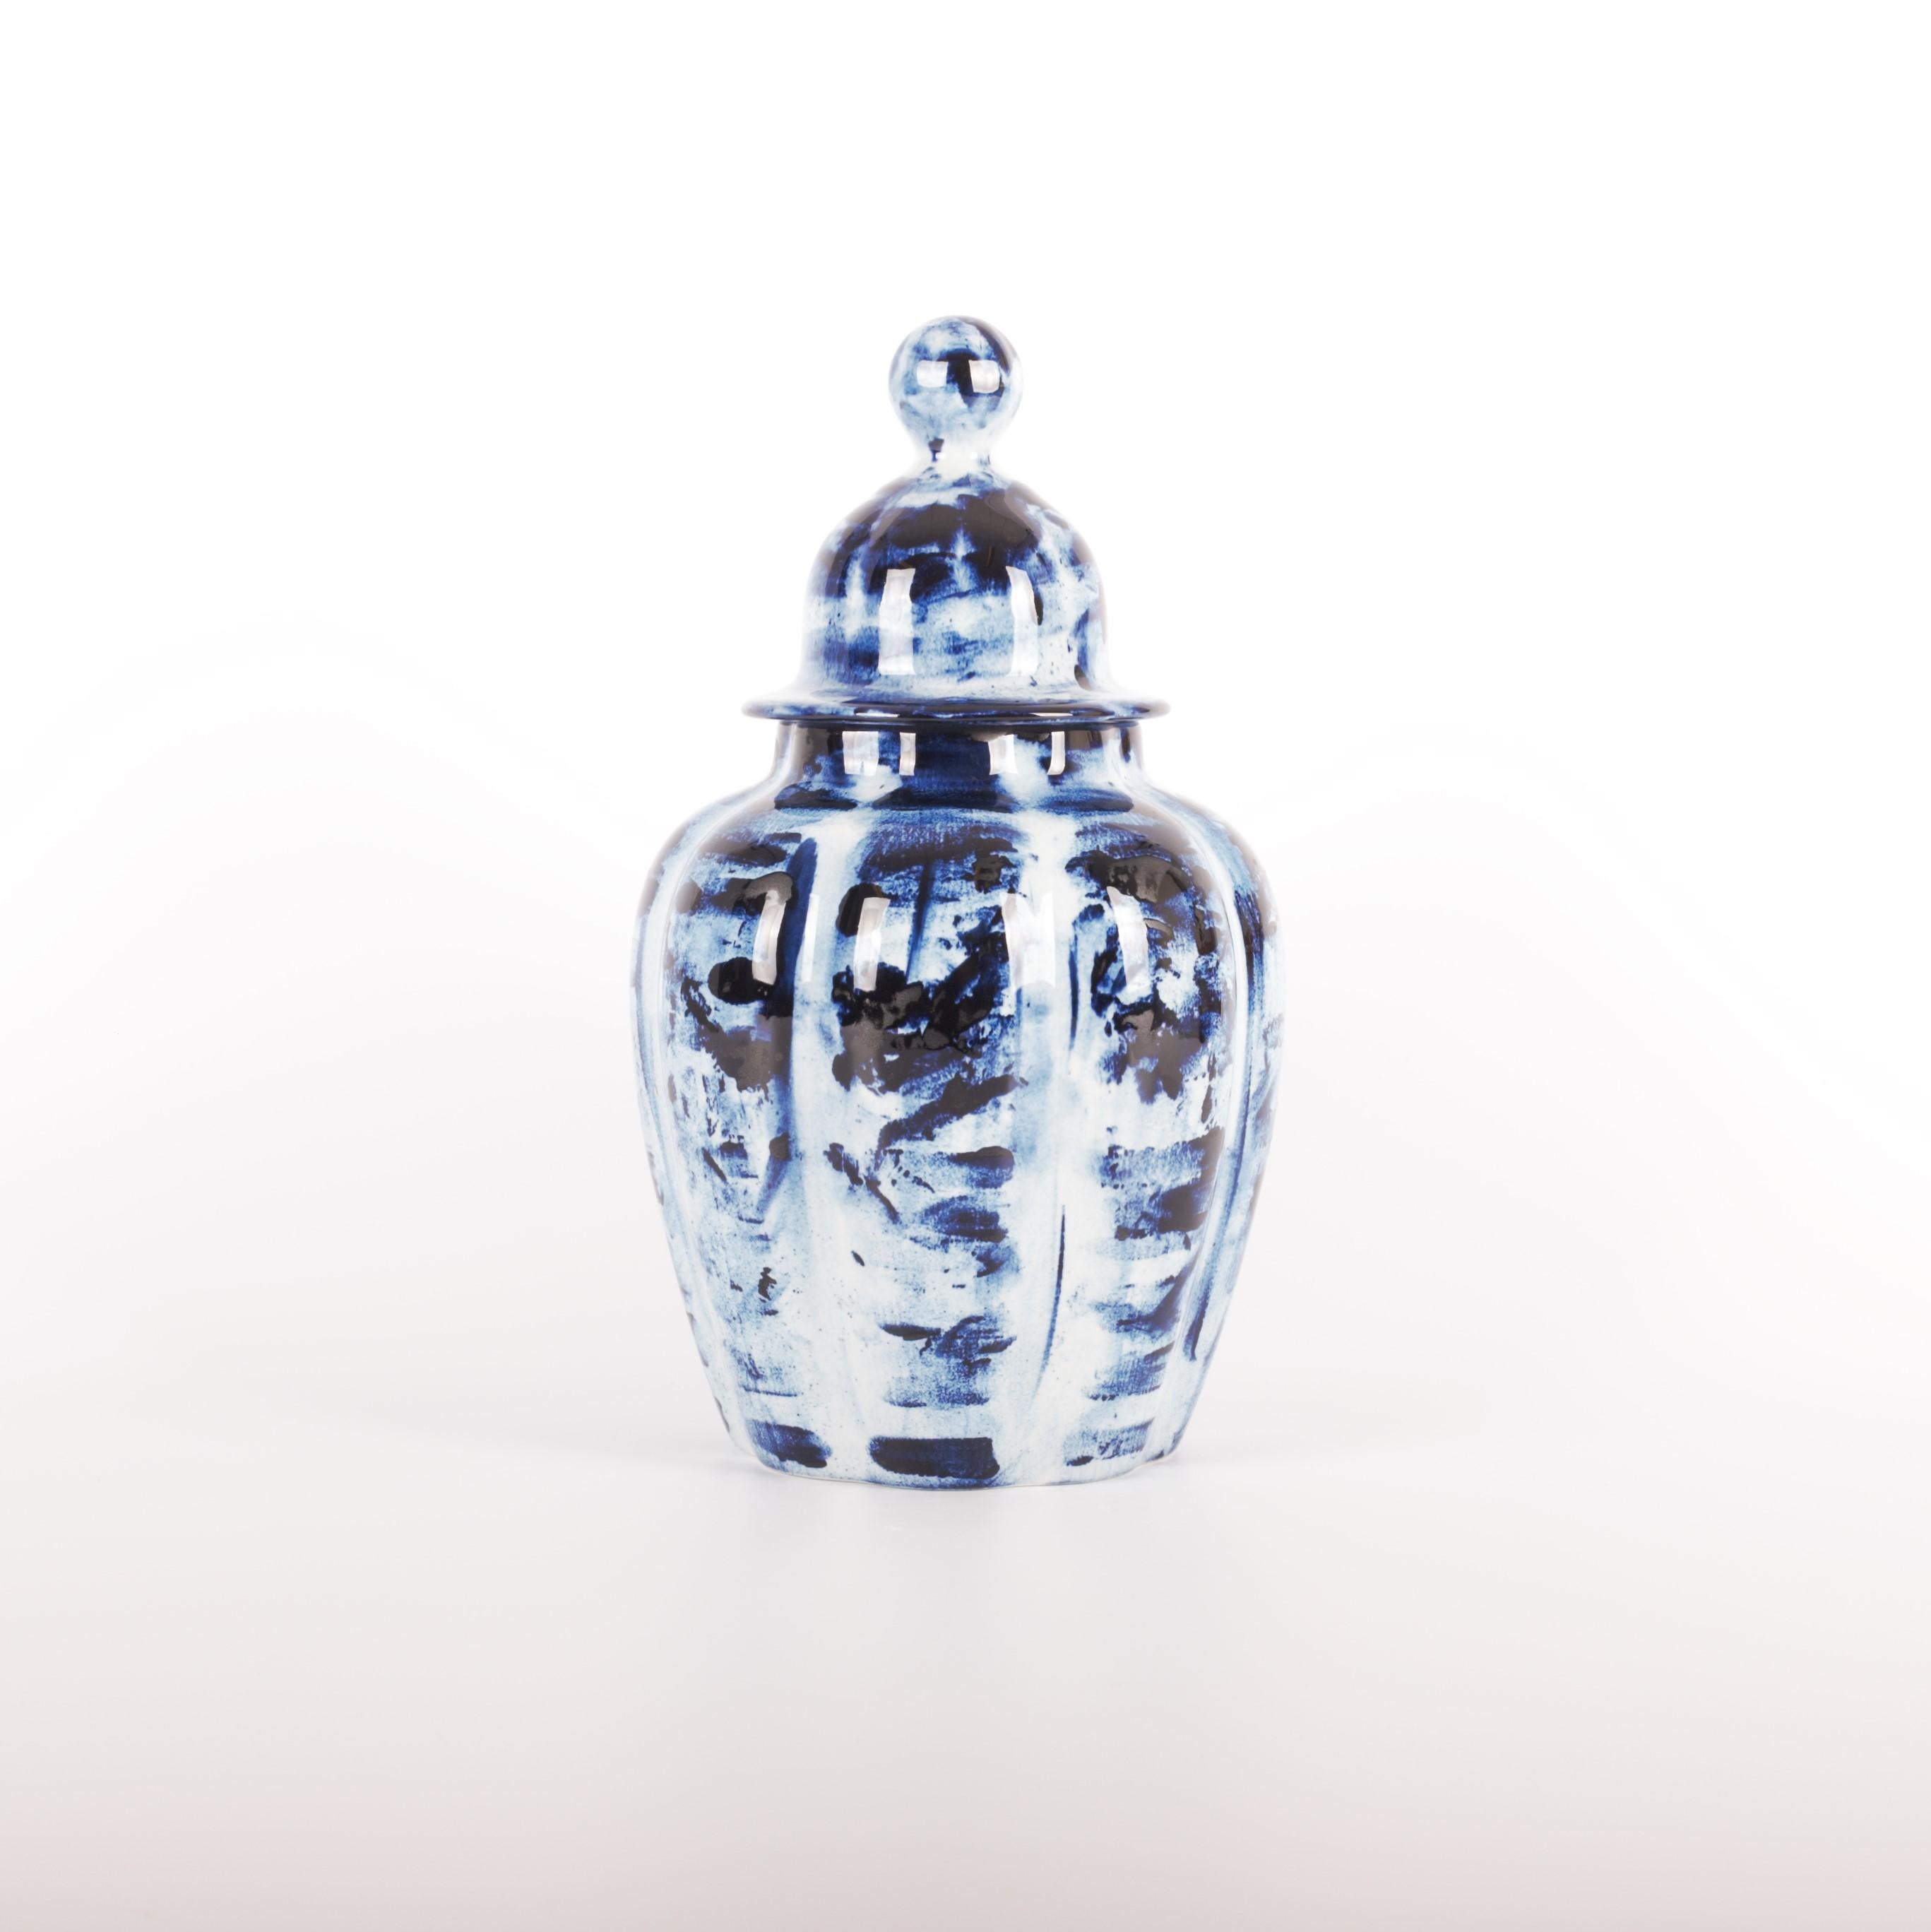 Dutch Delft Blue Vase with Lid #1, by Marcel Wanders, Hand Painted, 2006, Unique